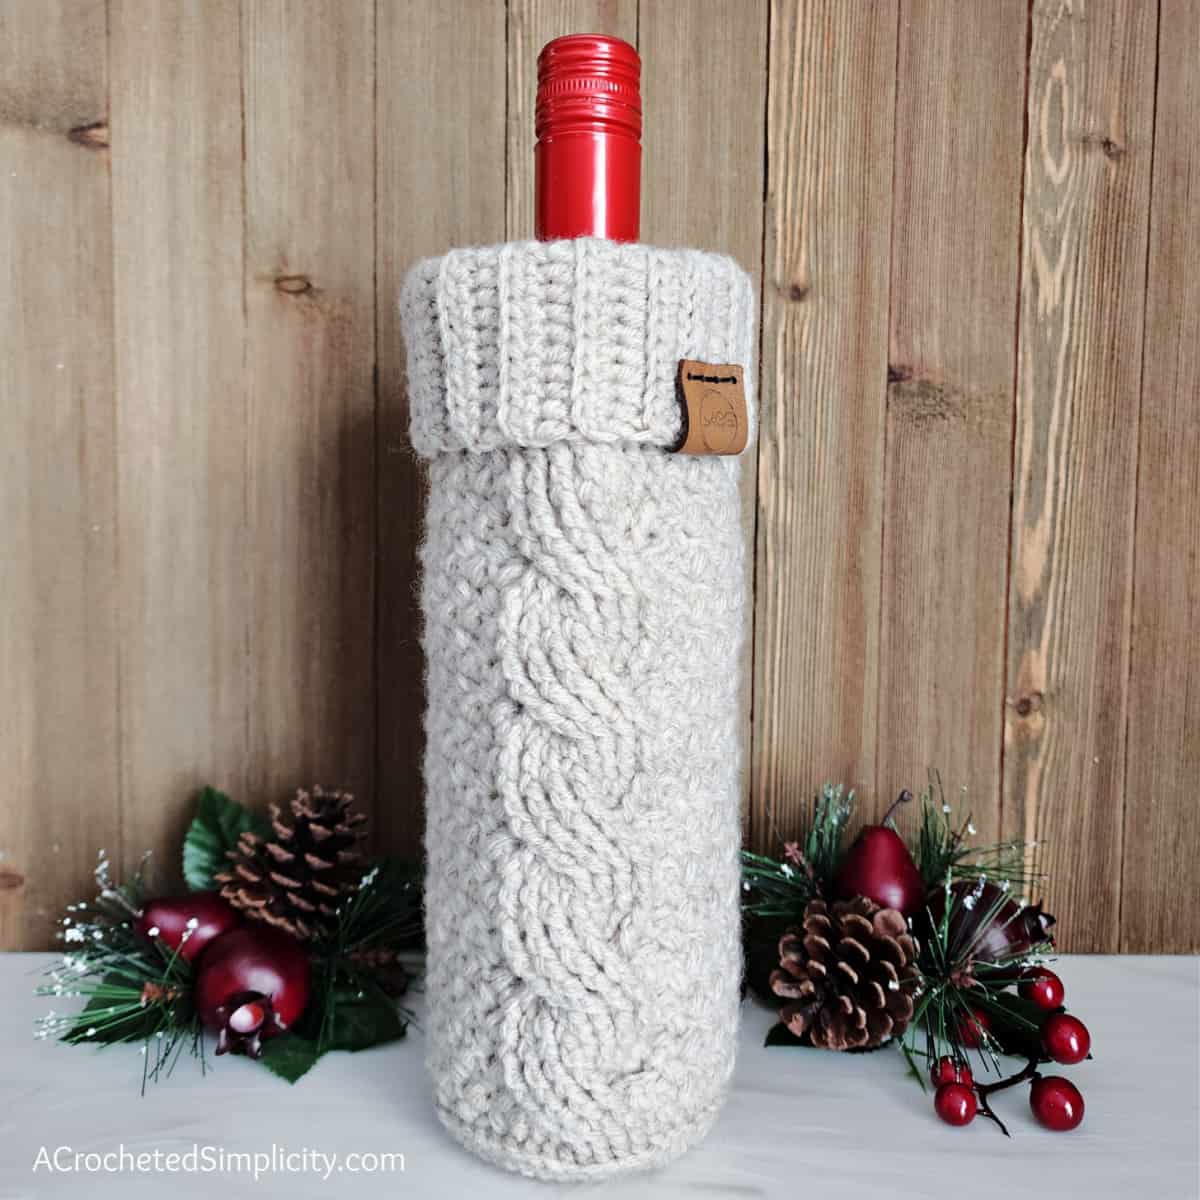 Cabled crochet wine cozy with a bottle of wine and holiday decor.